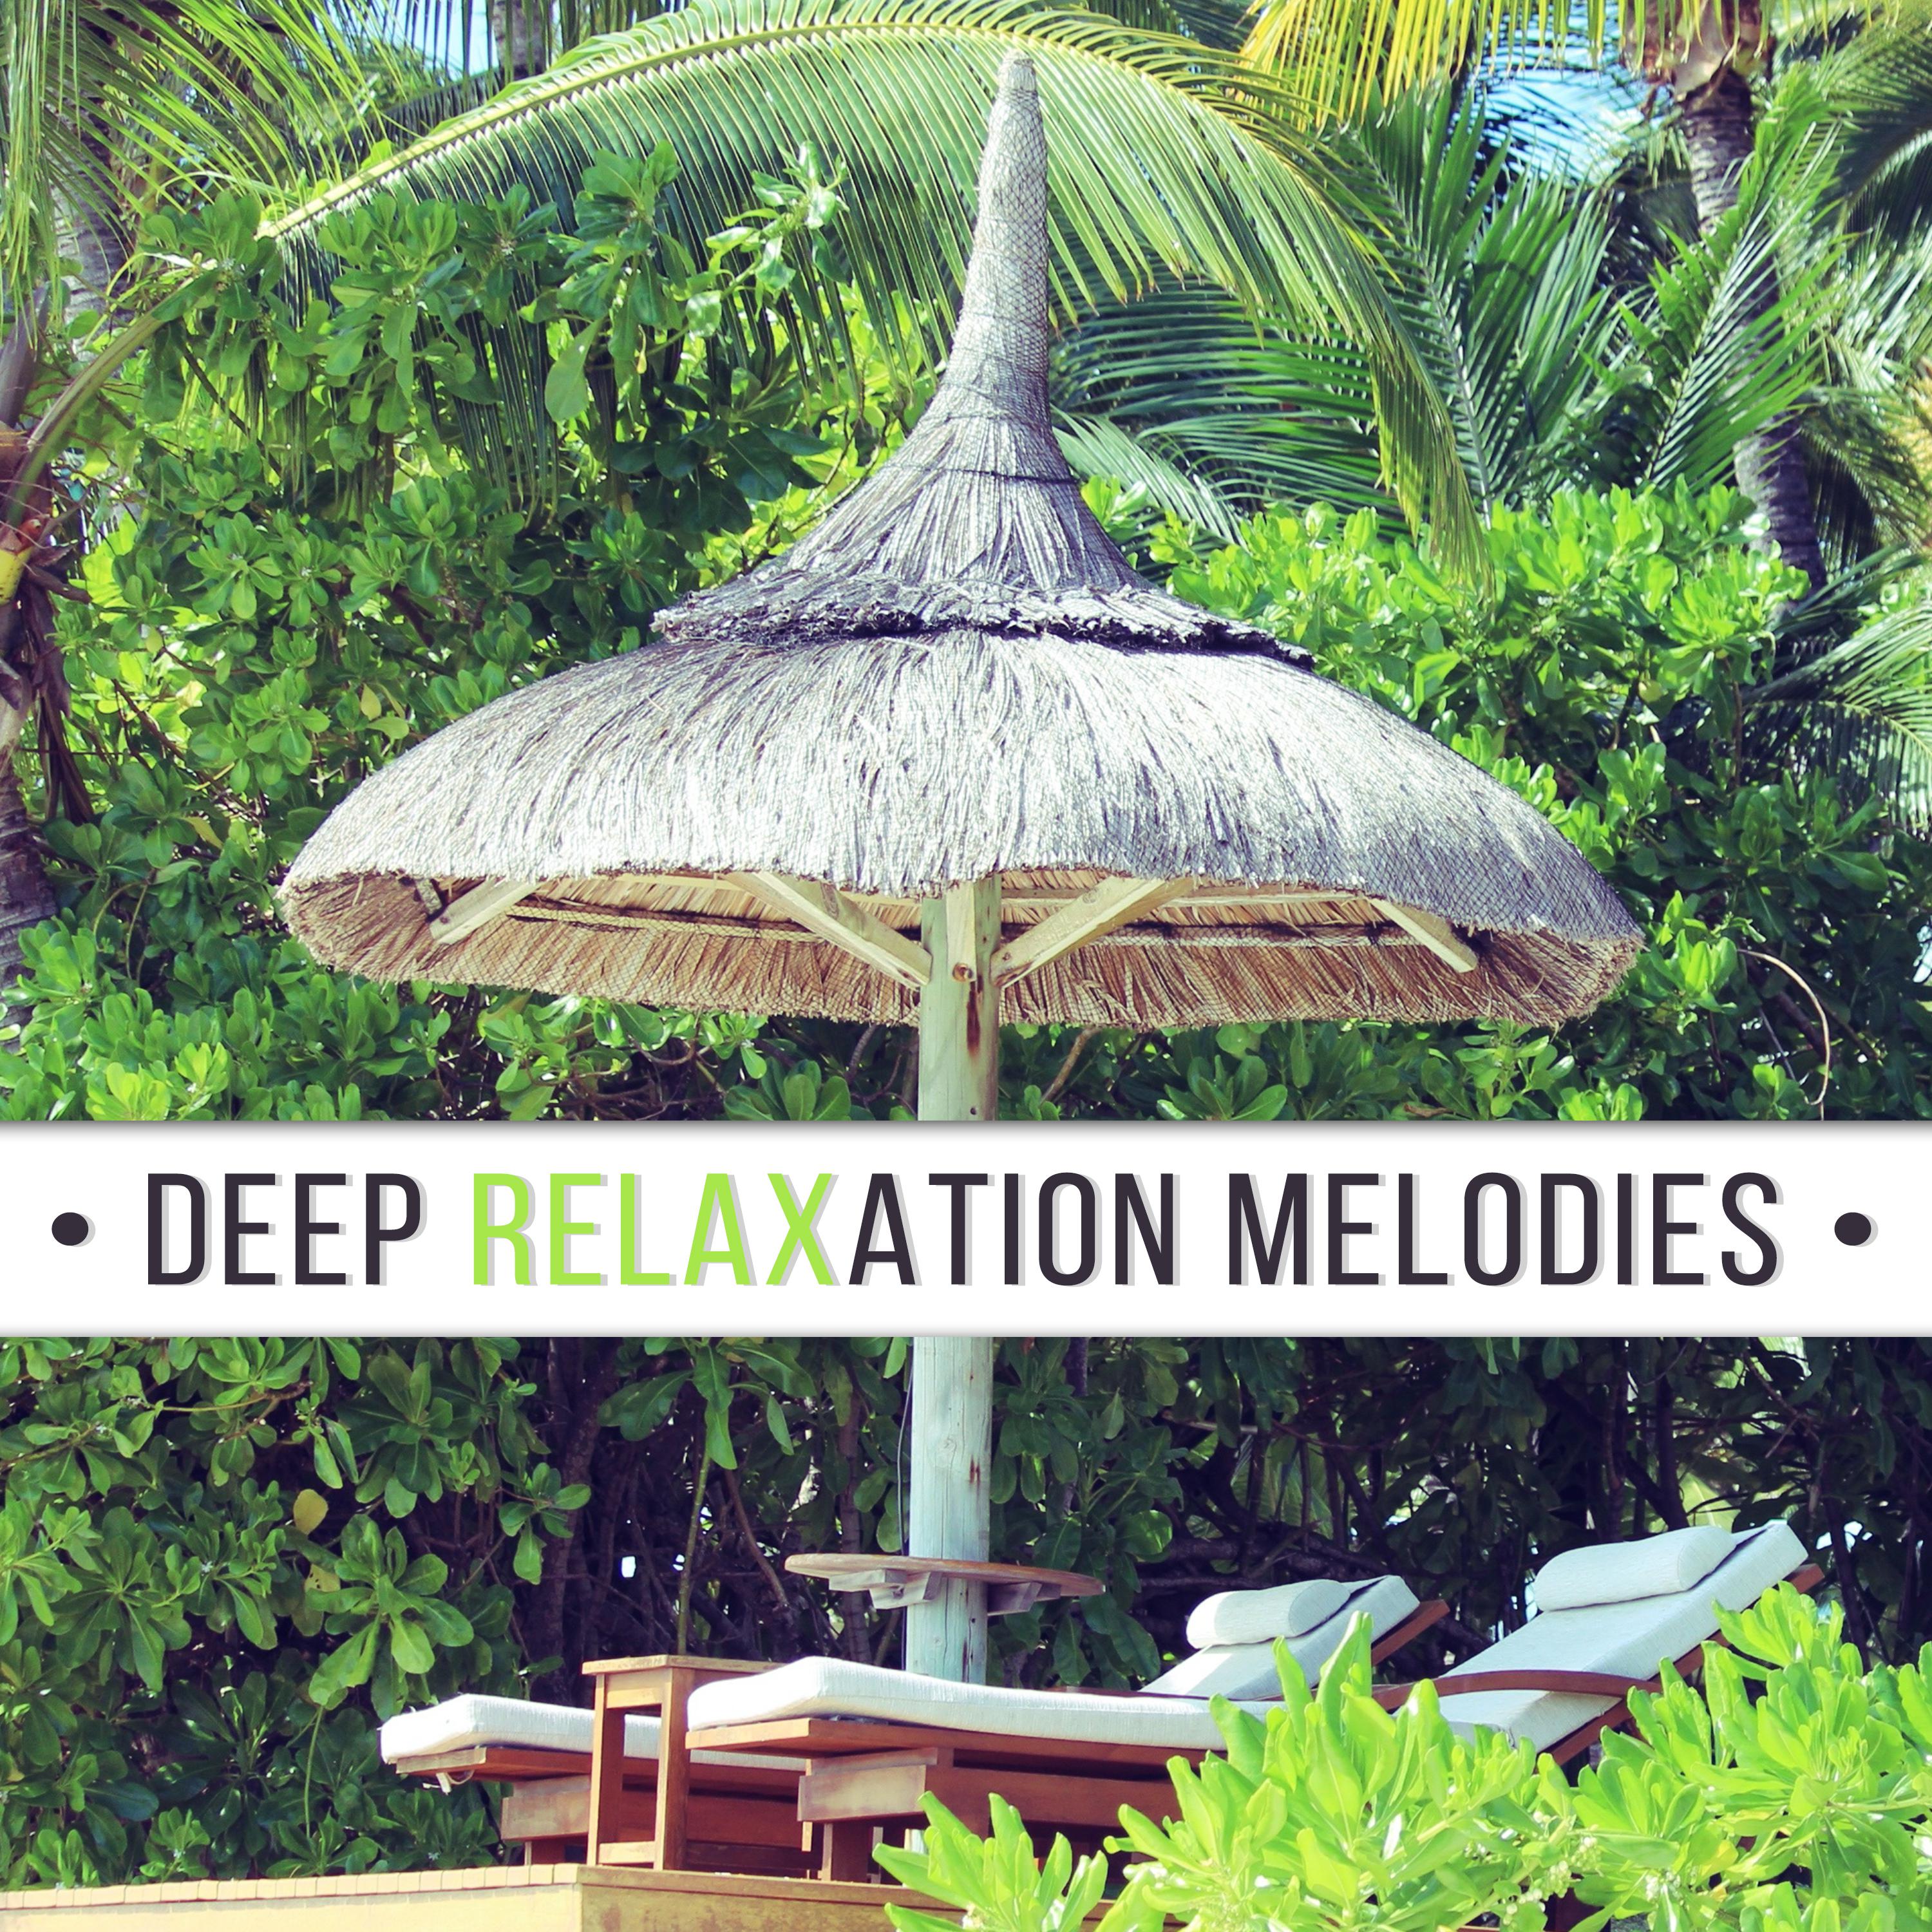 Deep Relaxation Melodies – Summer Chill Out 2017, Calm Down & Rest, Peaceful Music for Holiday, Clear Mind